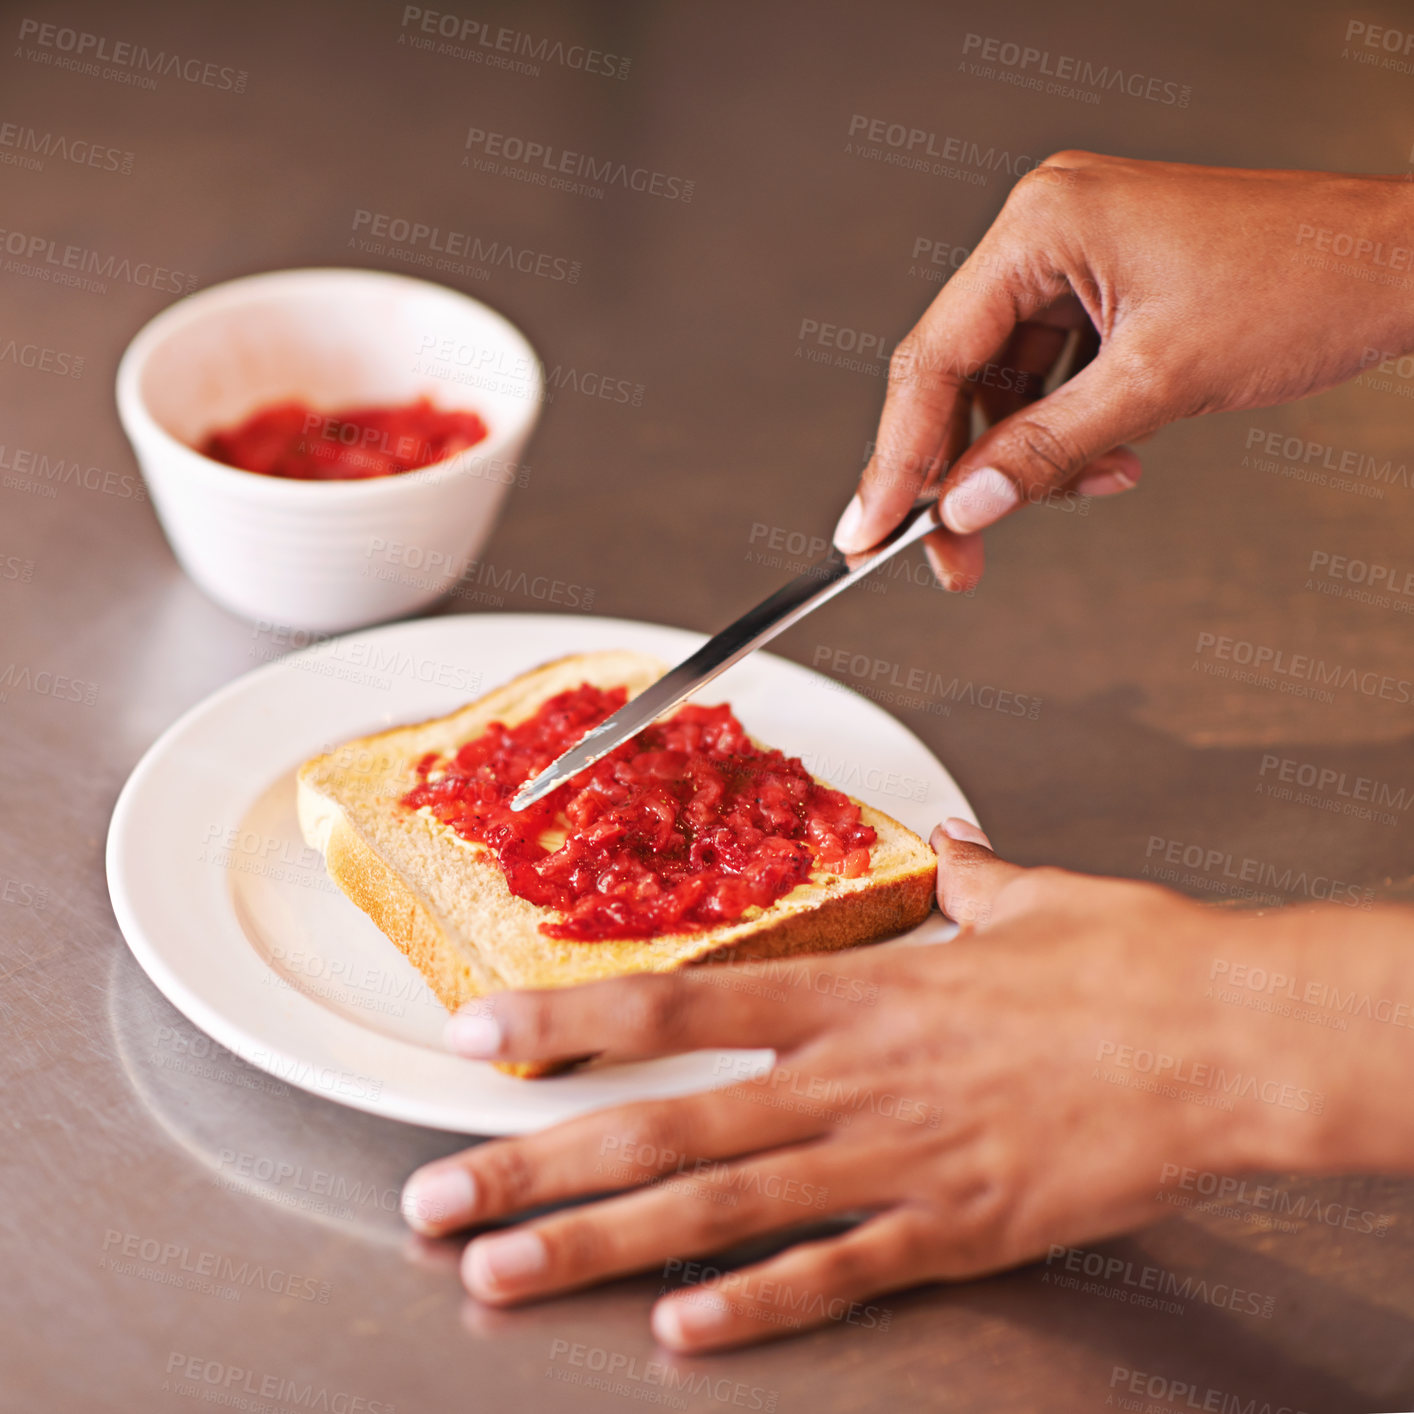 Buy stock photo Cropped shot of a woman spreading fruity jam onto toast